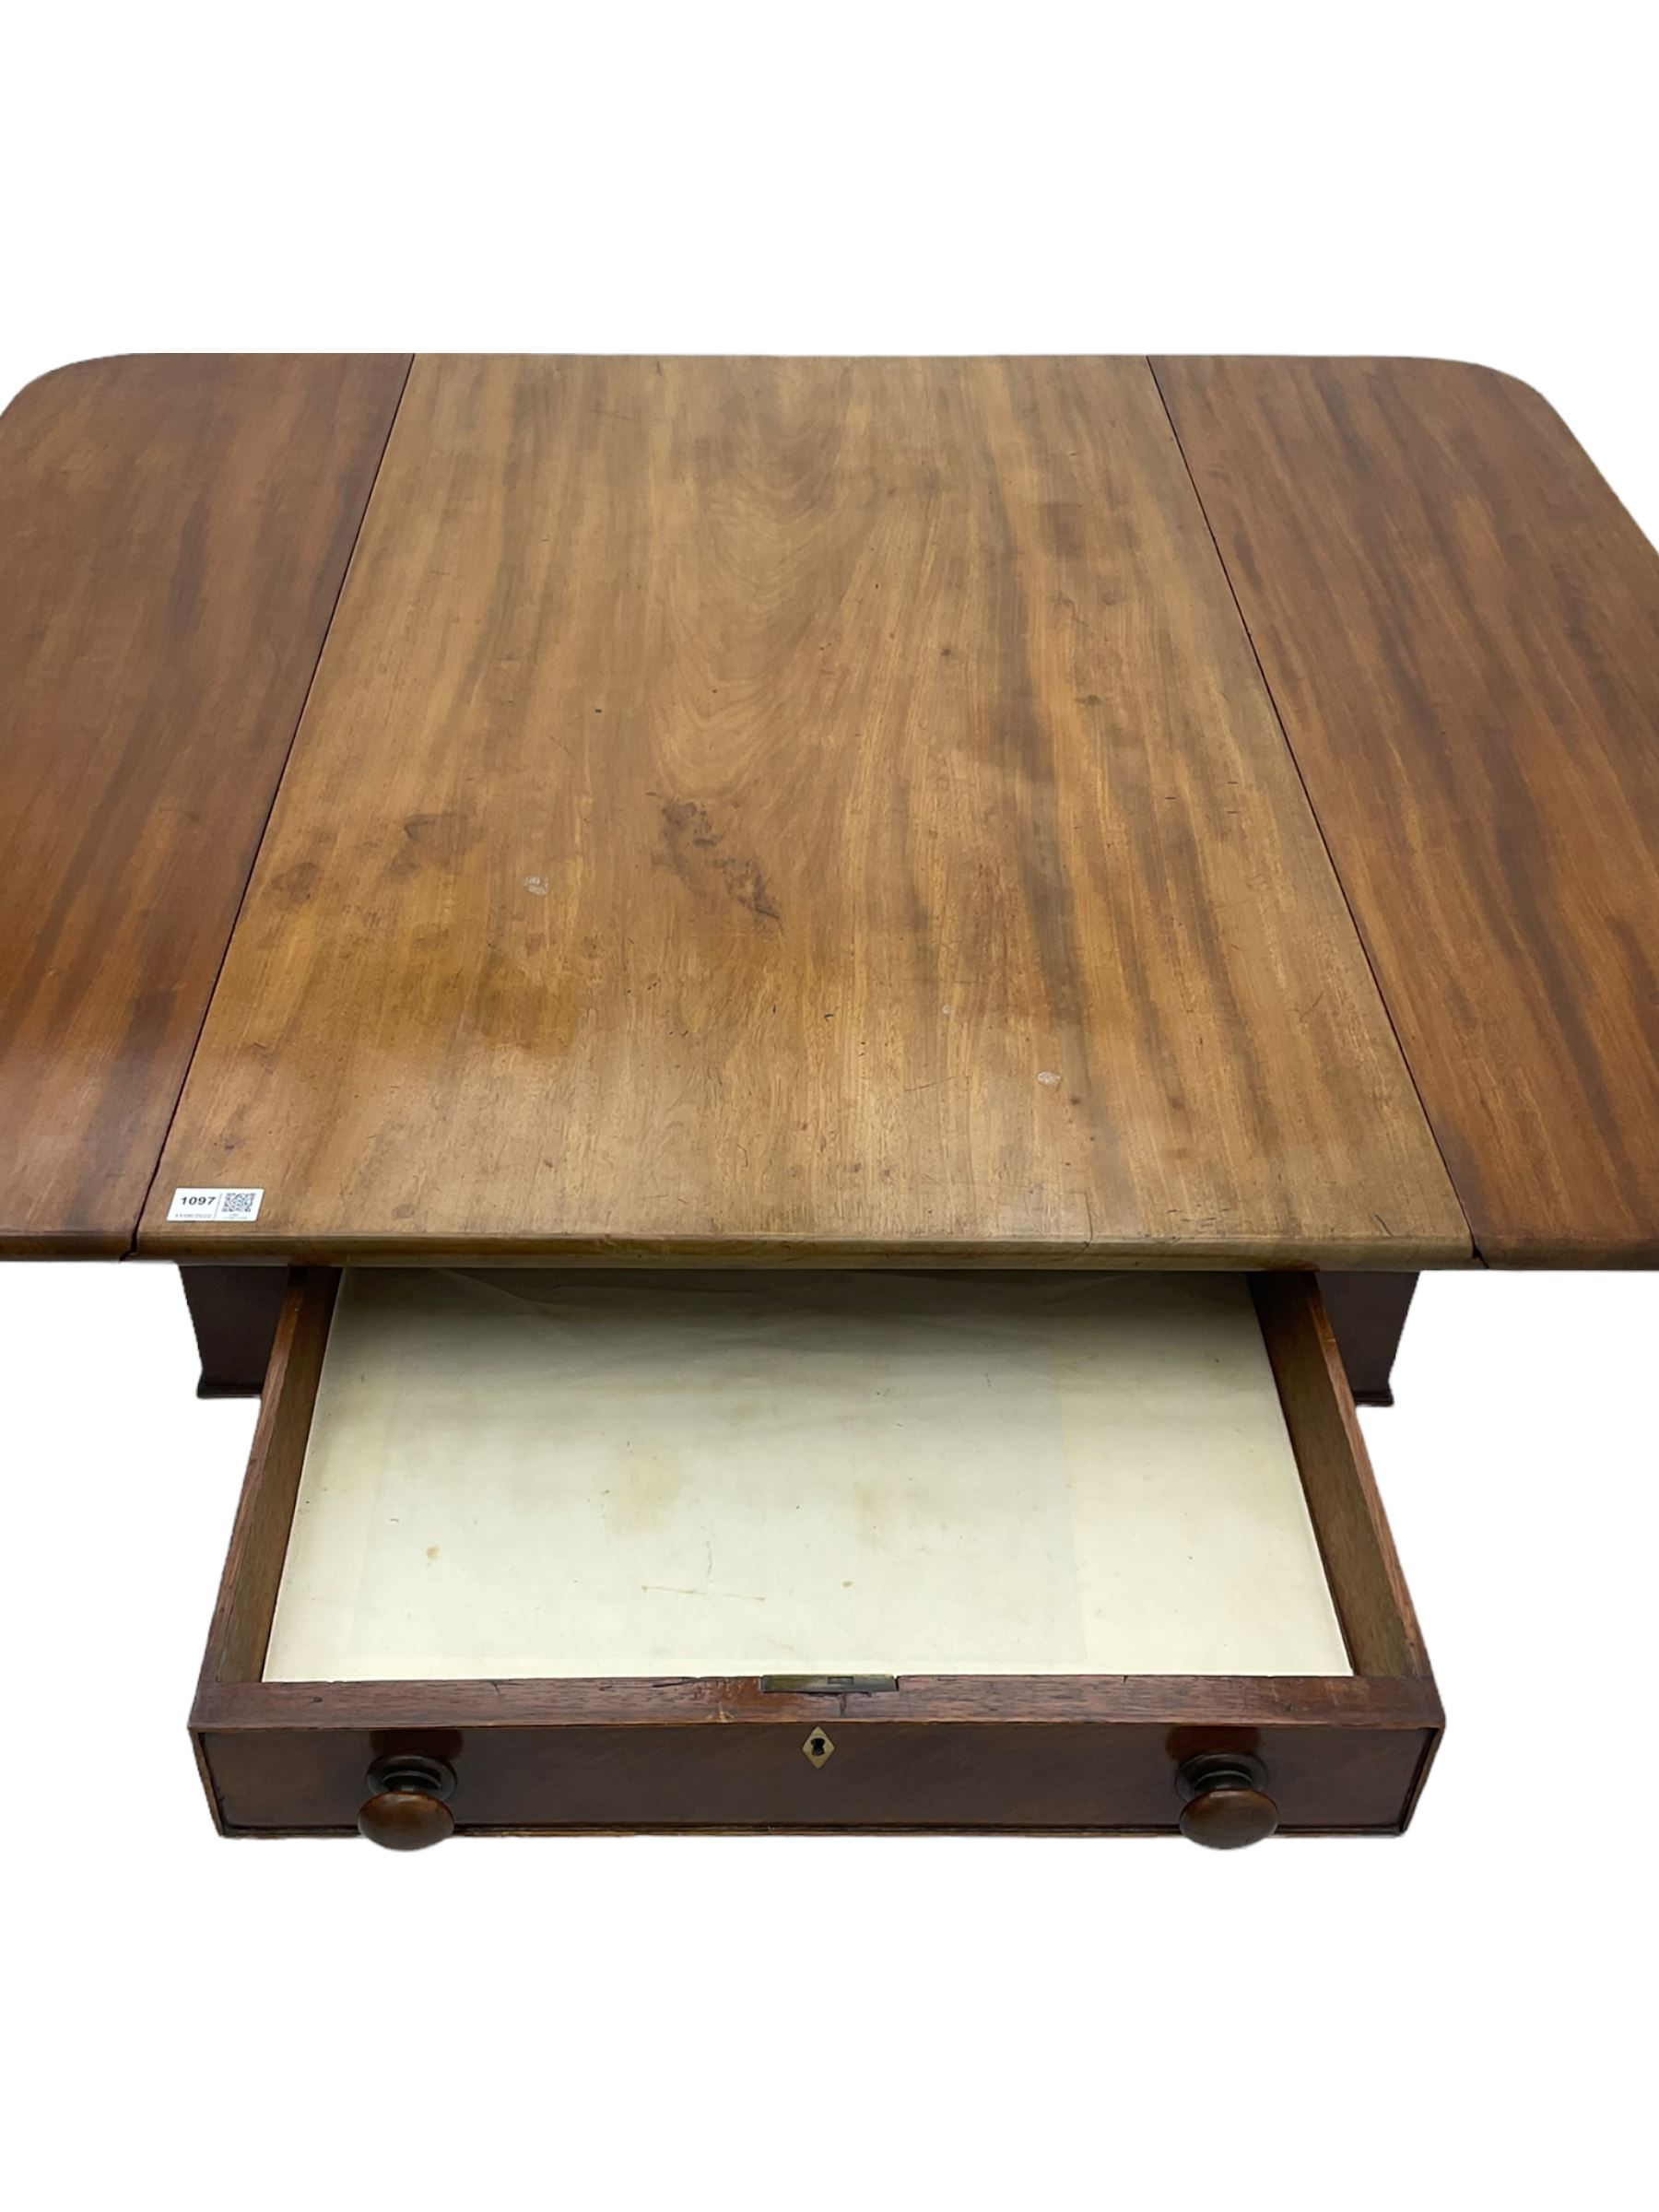 George III mahogany supper table - Image 6 of 6